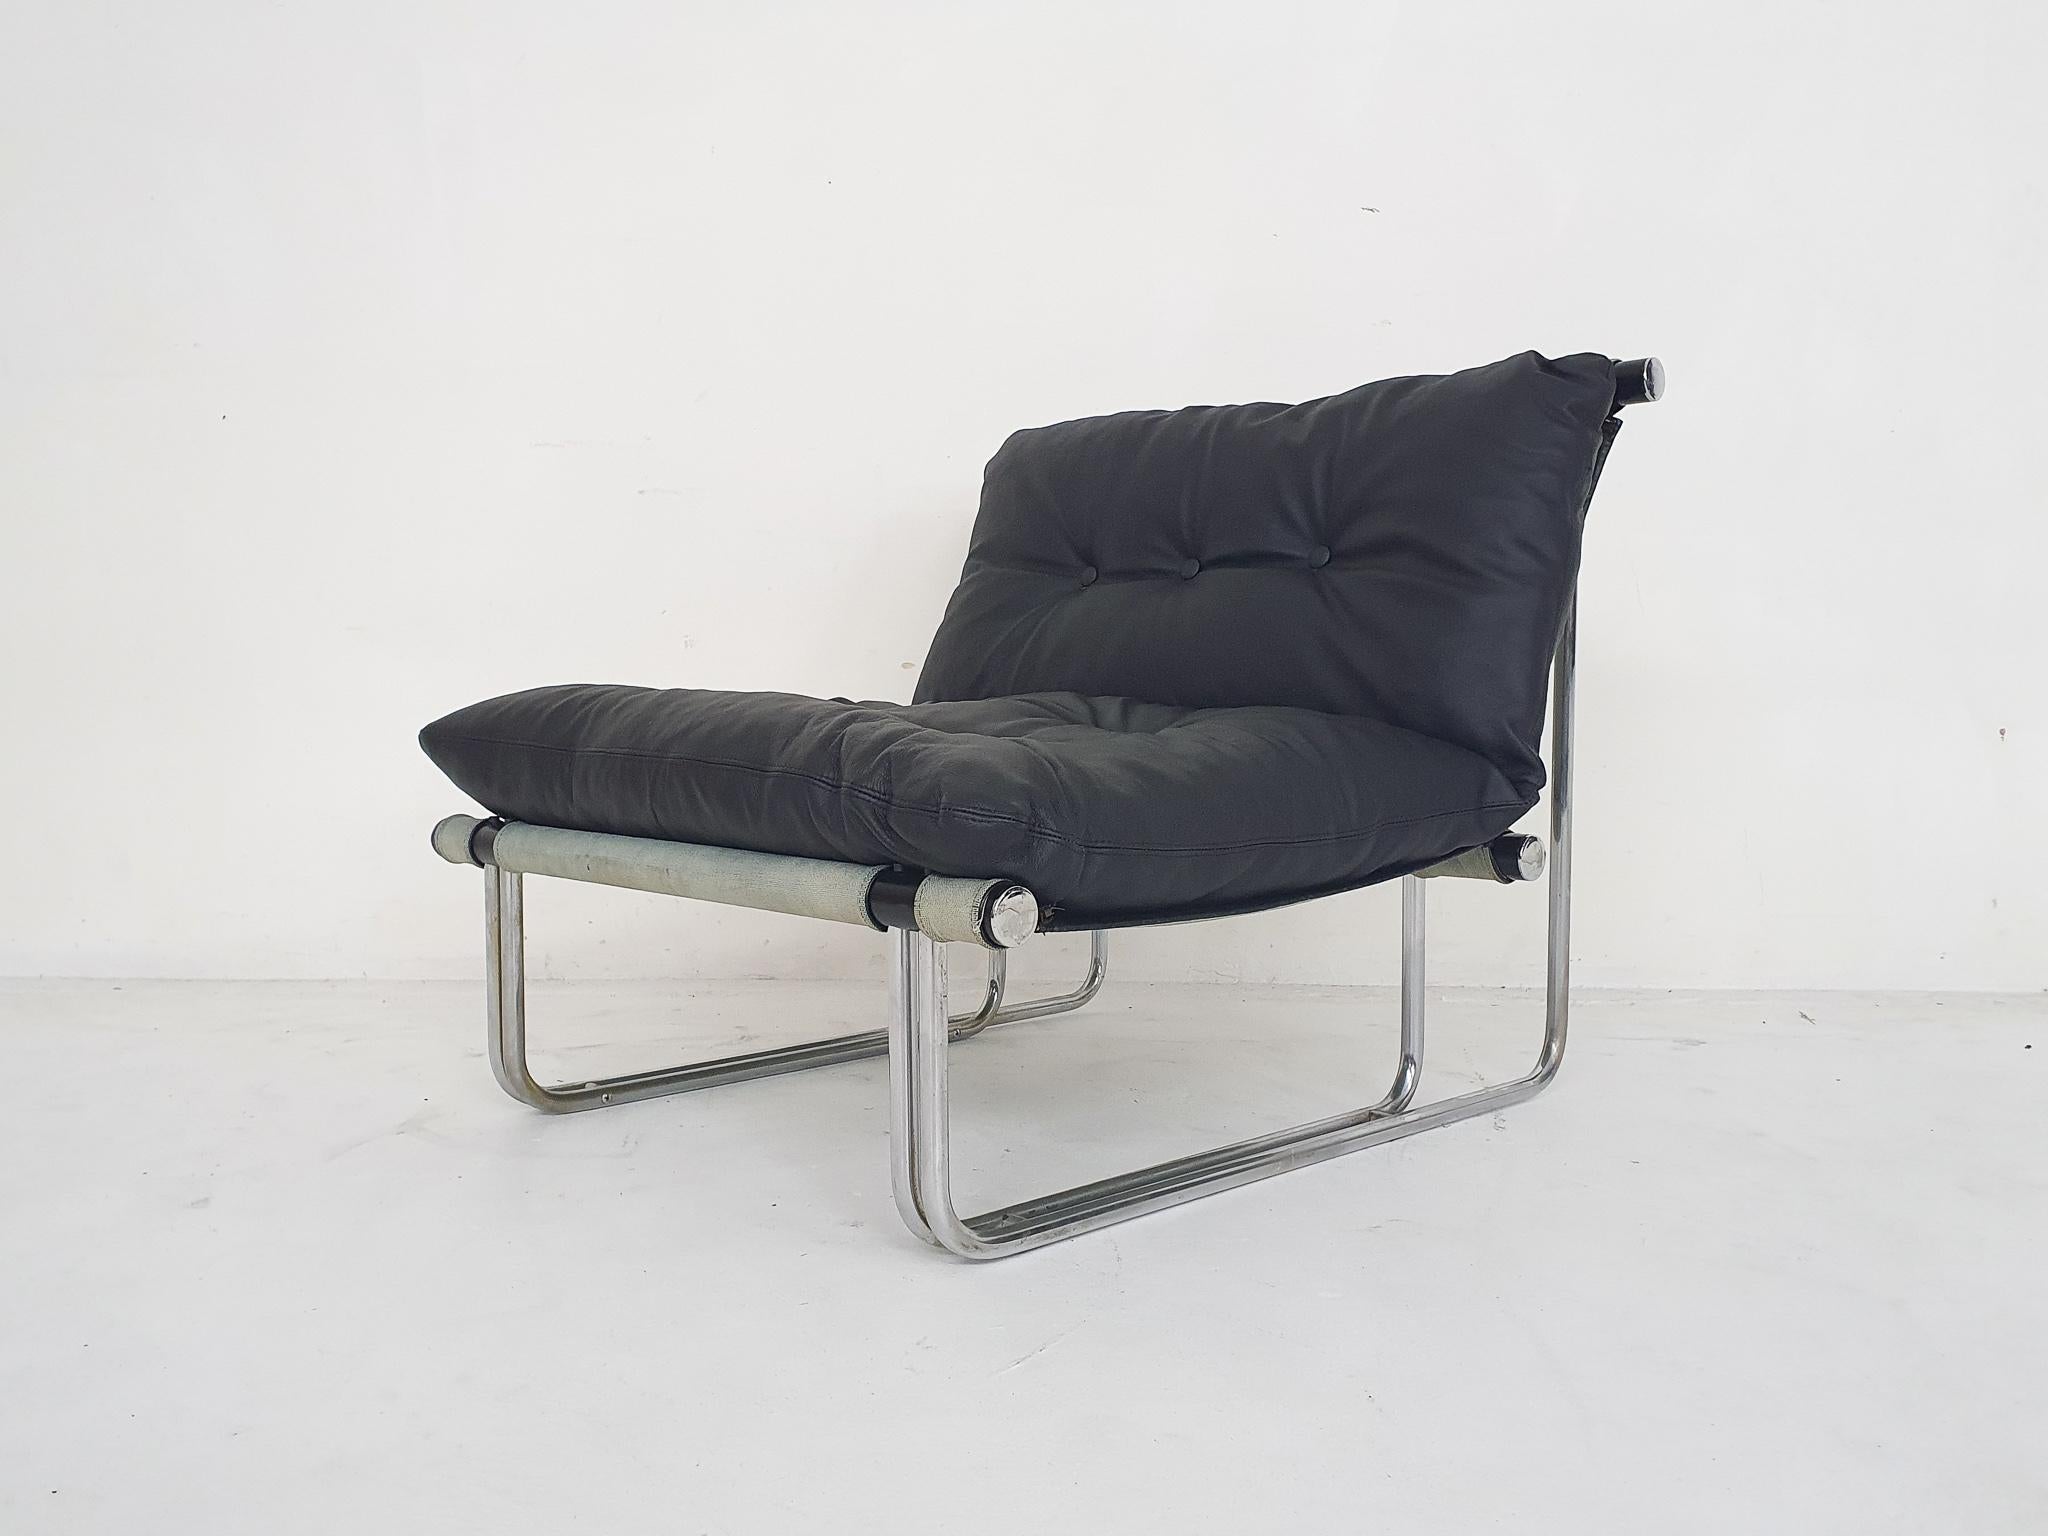 Tubular lounge chair with canvas seating and black leather cushion by Steiner.
The cushion has been re-upholstered, and are attached to the canvas with zippers.
Unfortunately we can not find this model, but the designer might be Pascel Mourgue or